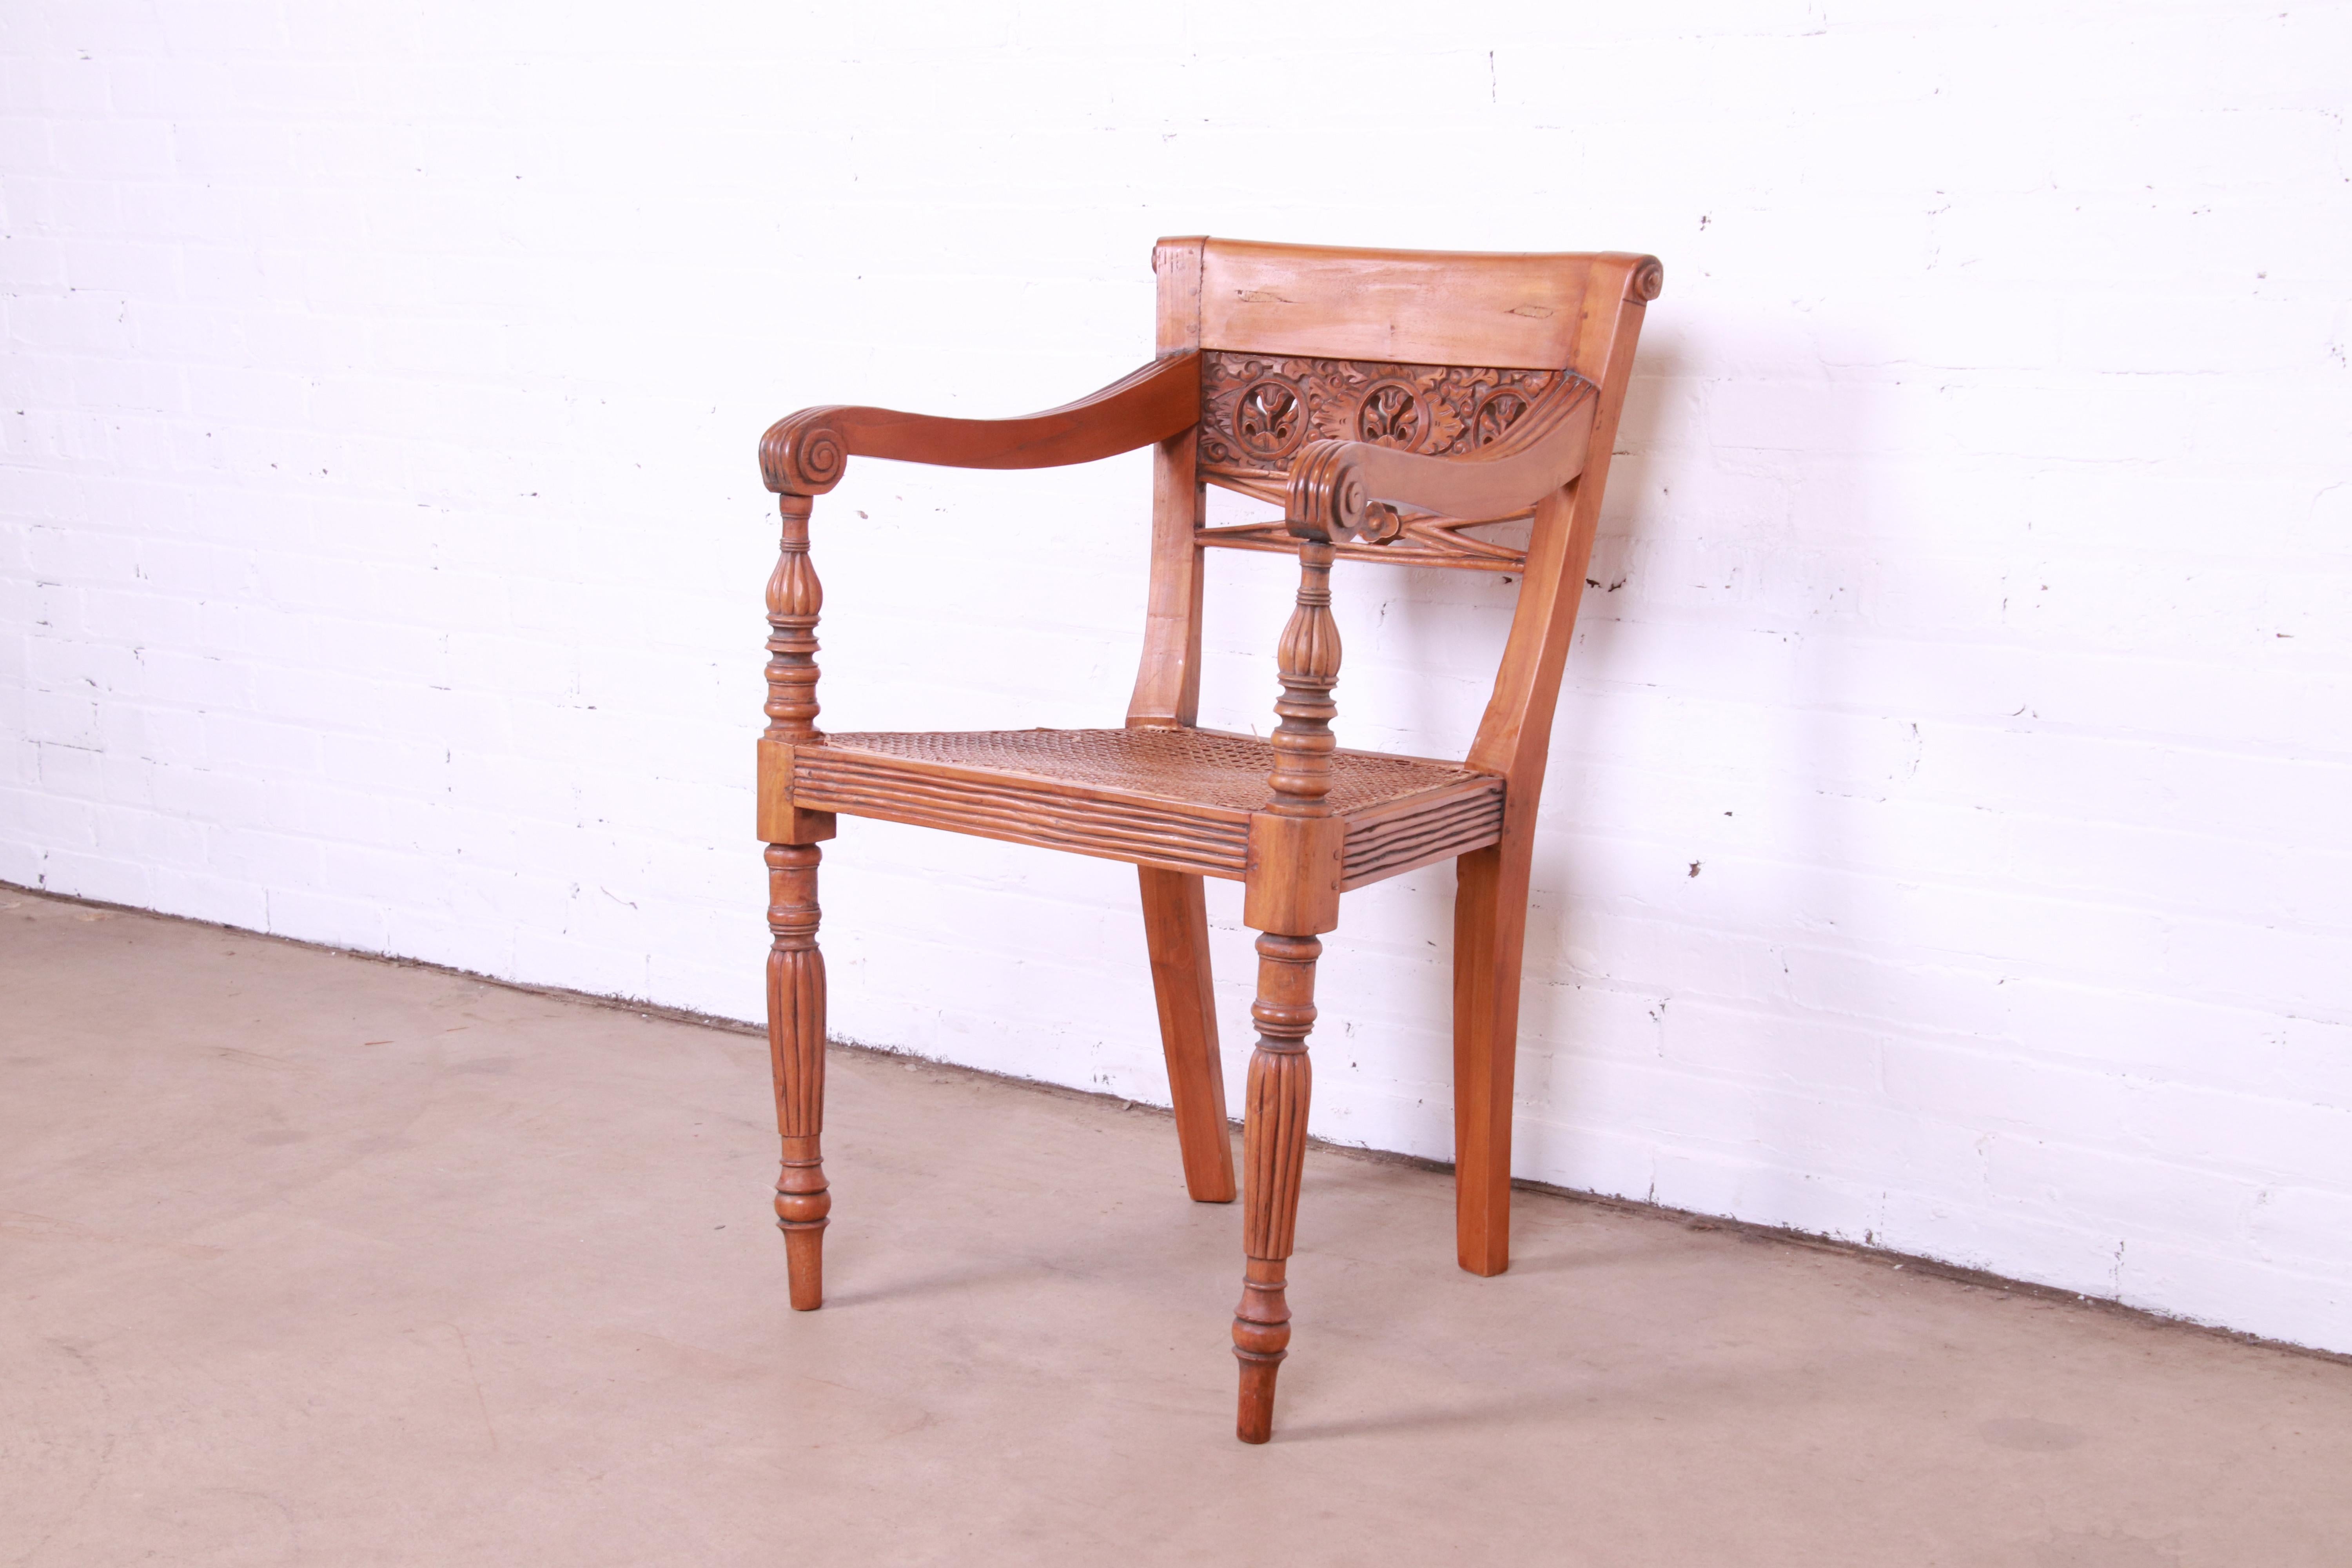 Vintage Regency Carved Walnut and Cane Armchair, Circa 1940s For Sale 2